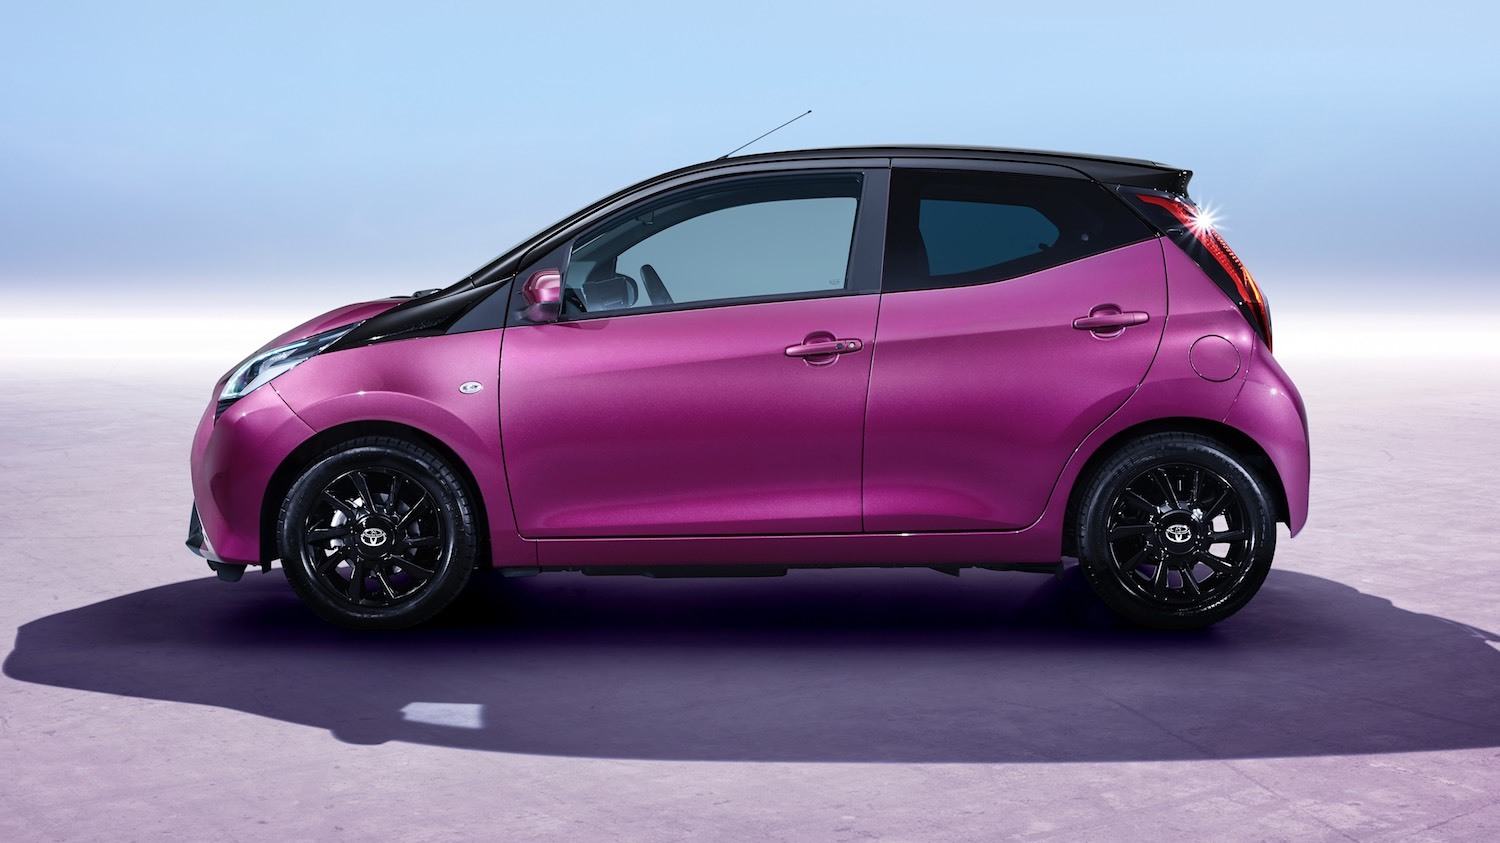 Tim Barnes-Clay Carwrite-ups reviews the New Toyota Aygo 2018 4